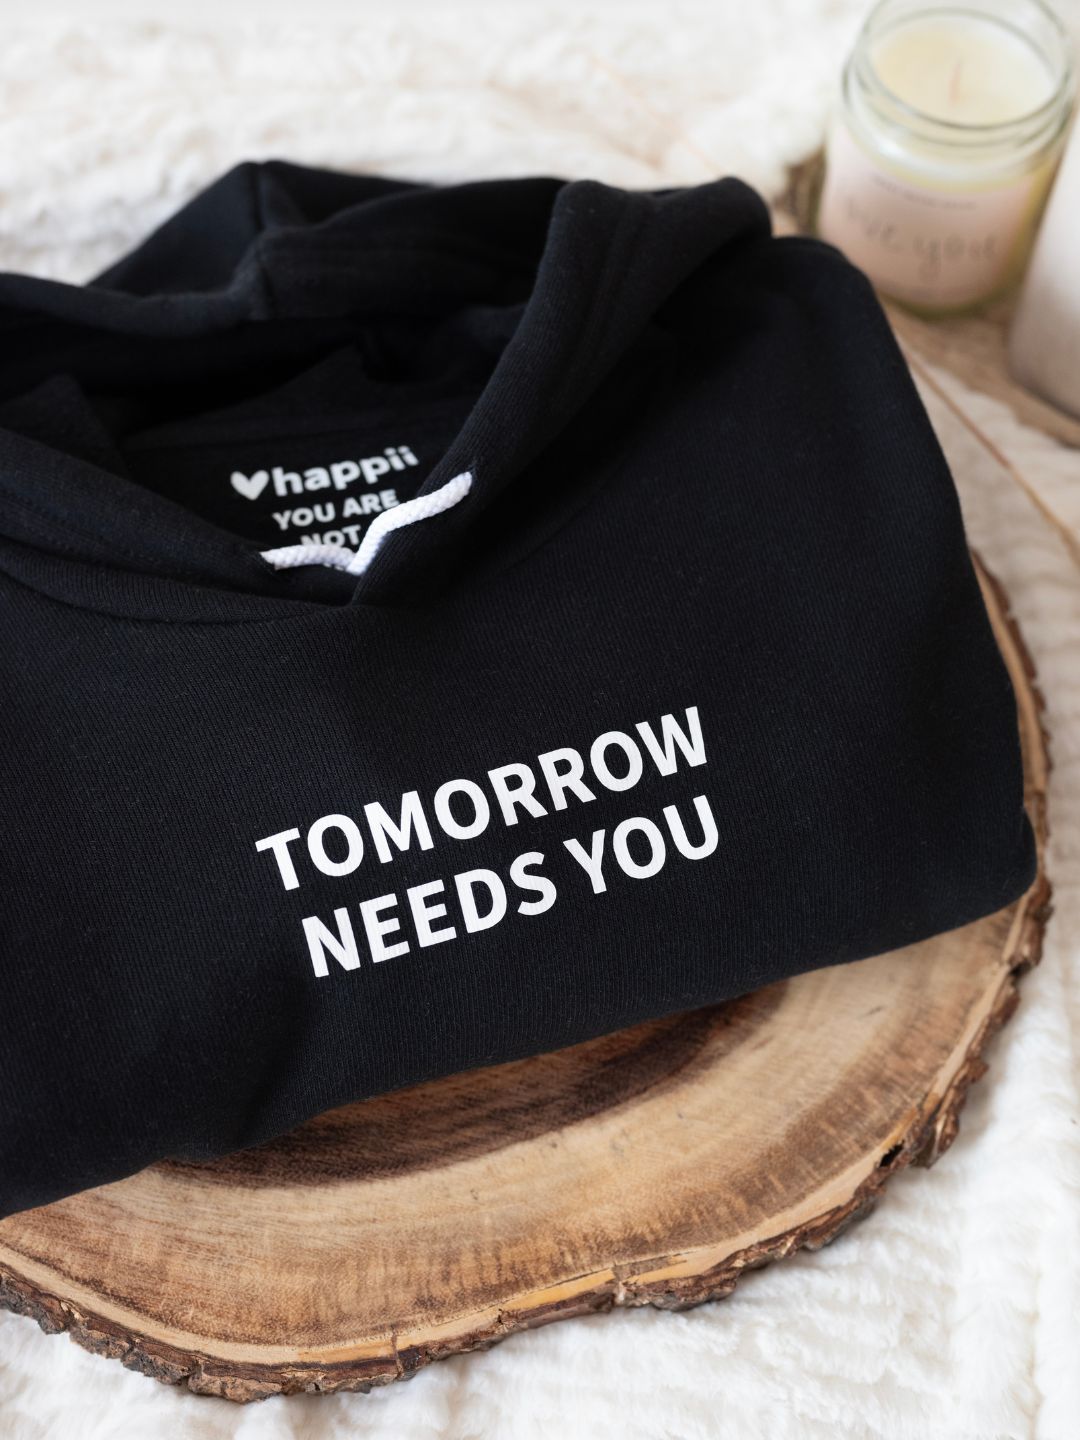 Tomorrow Needs You Suicide Prevention Hoodie